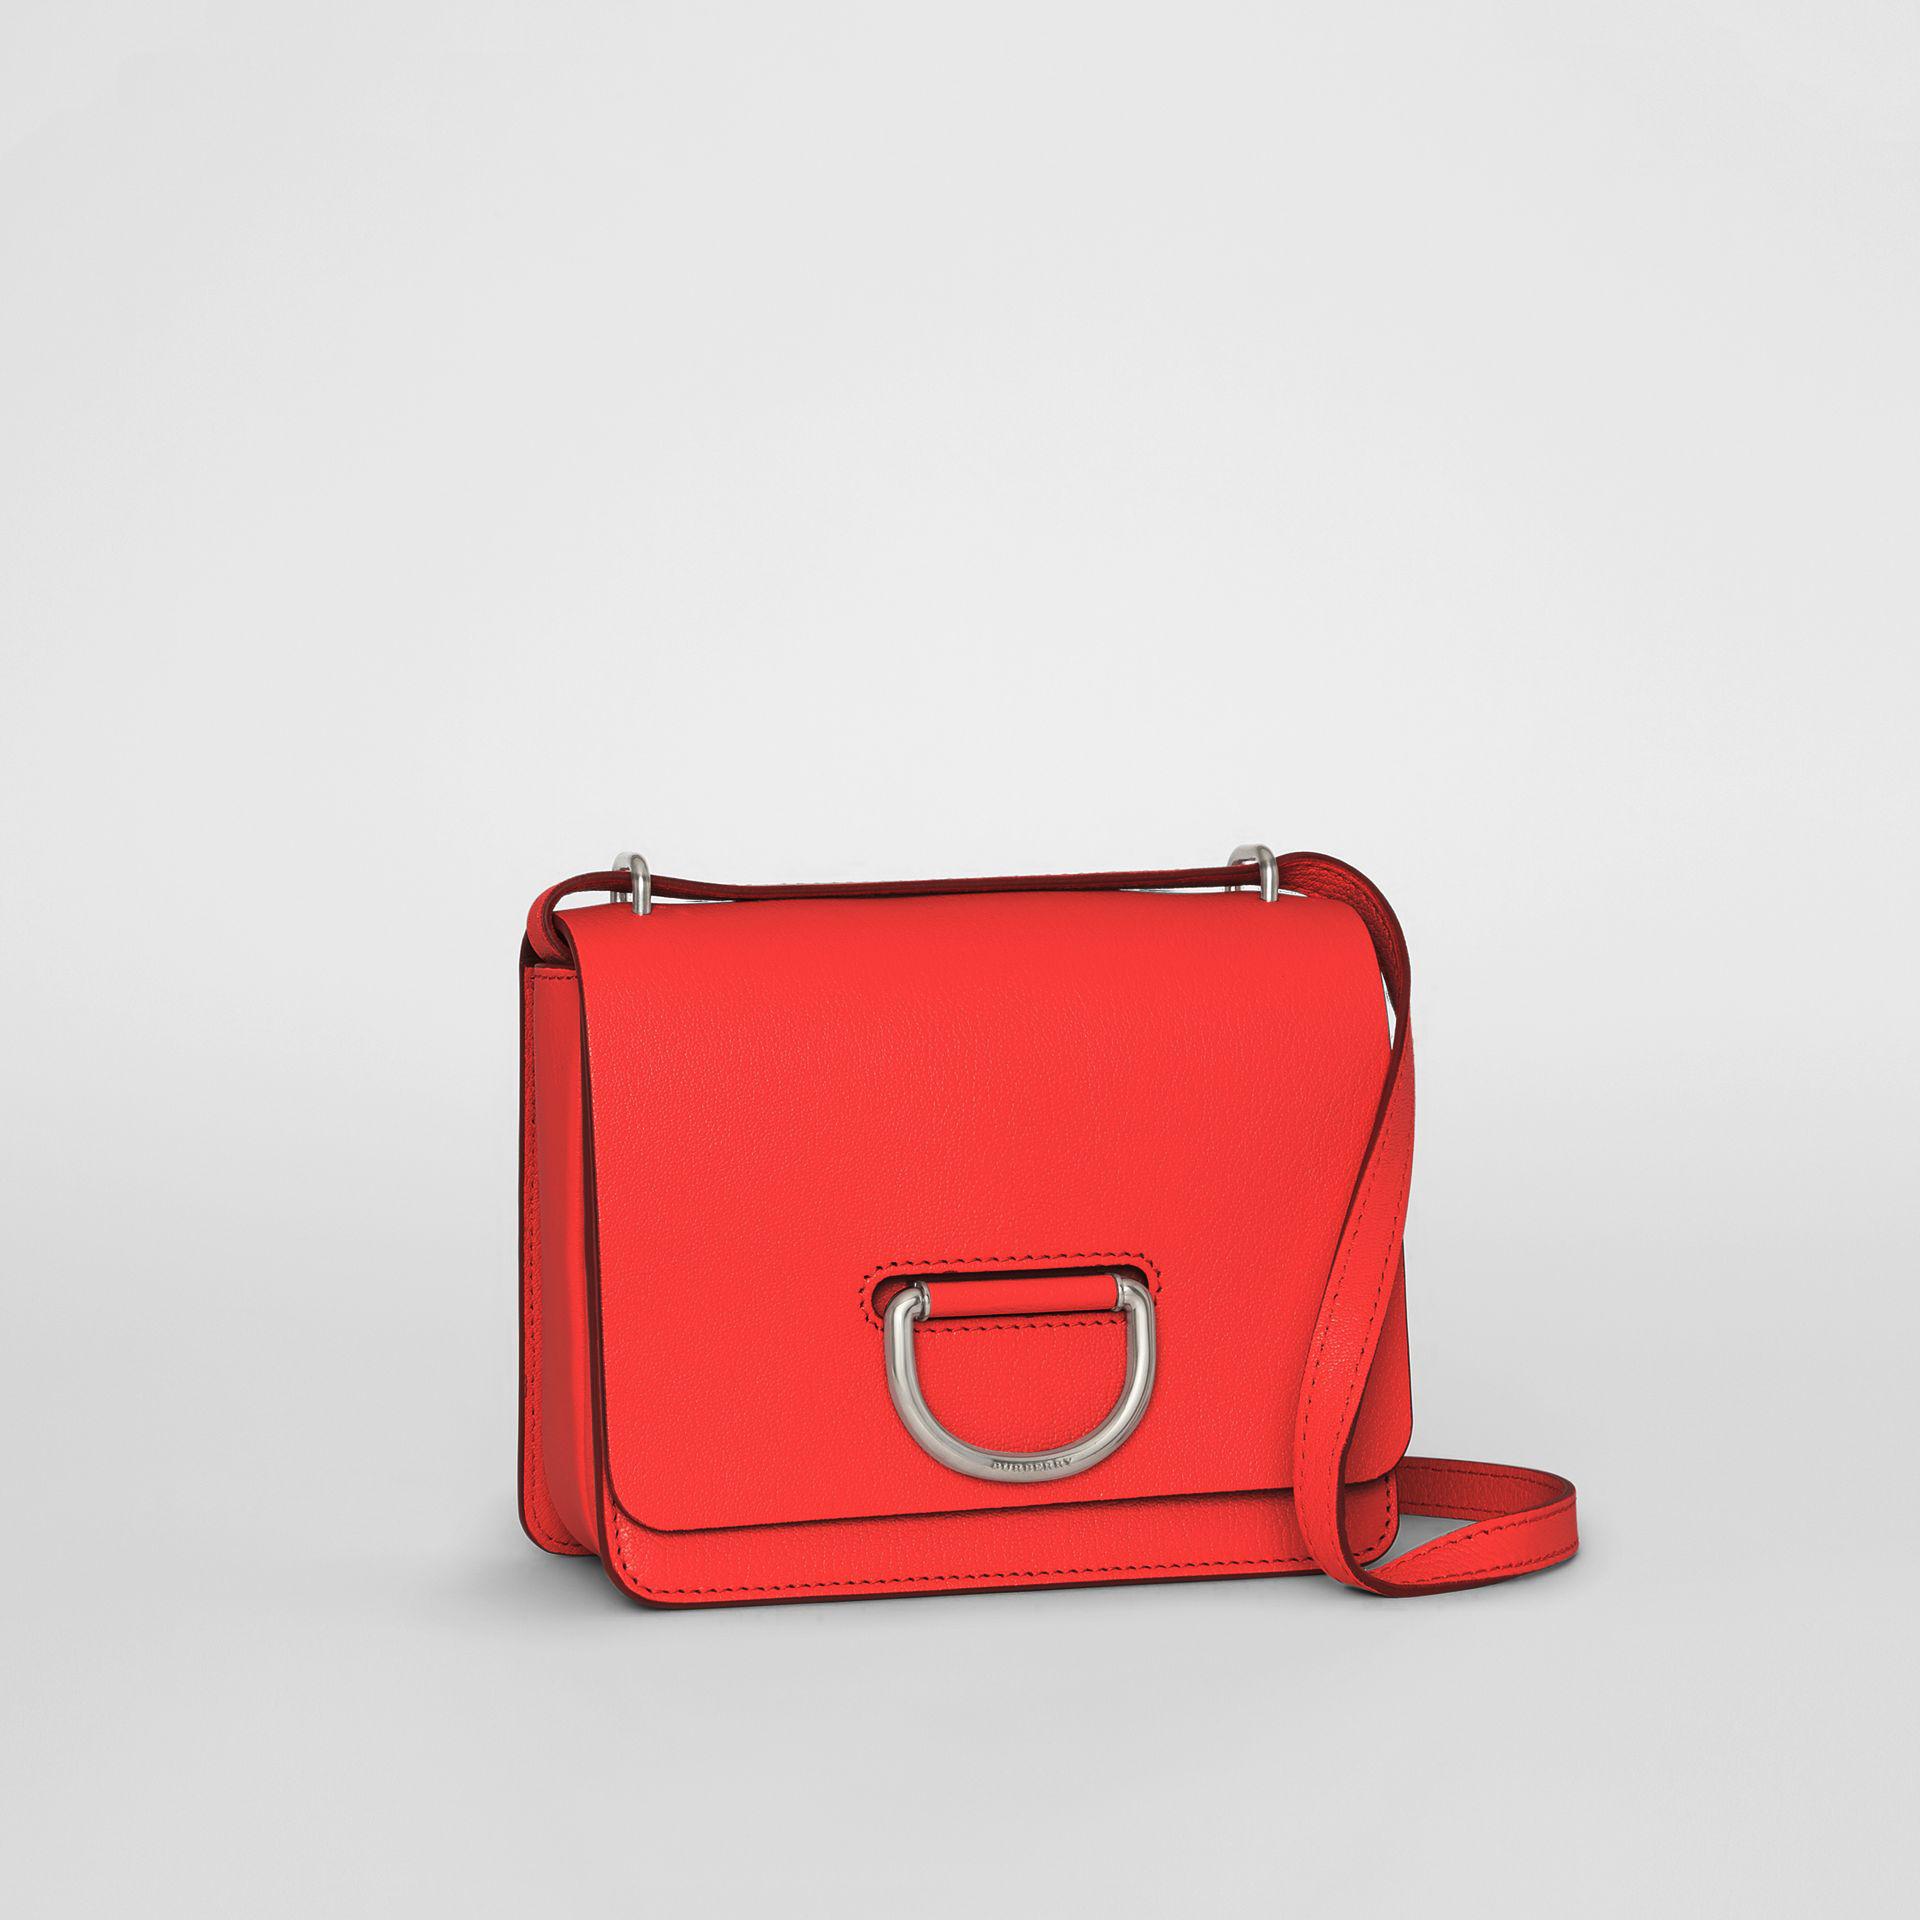 Burberry Leather Small D Ring Shoulder Bag in Bright Red (Red) | Lyst